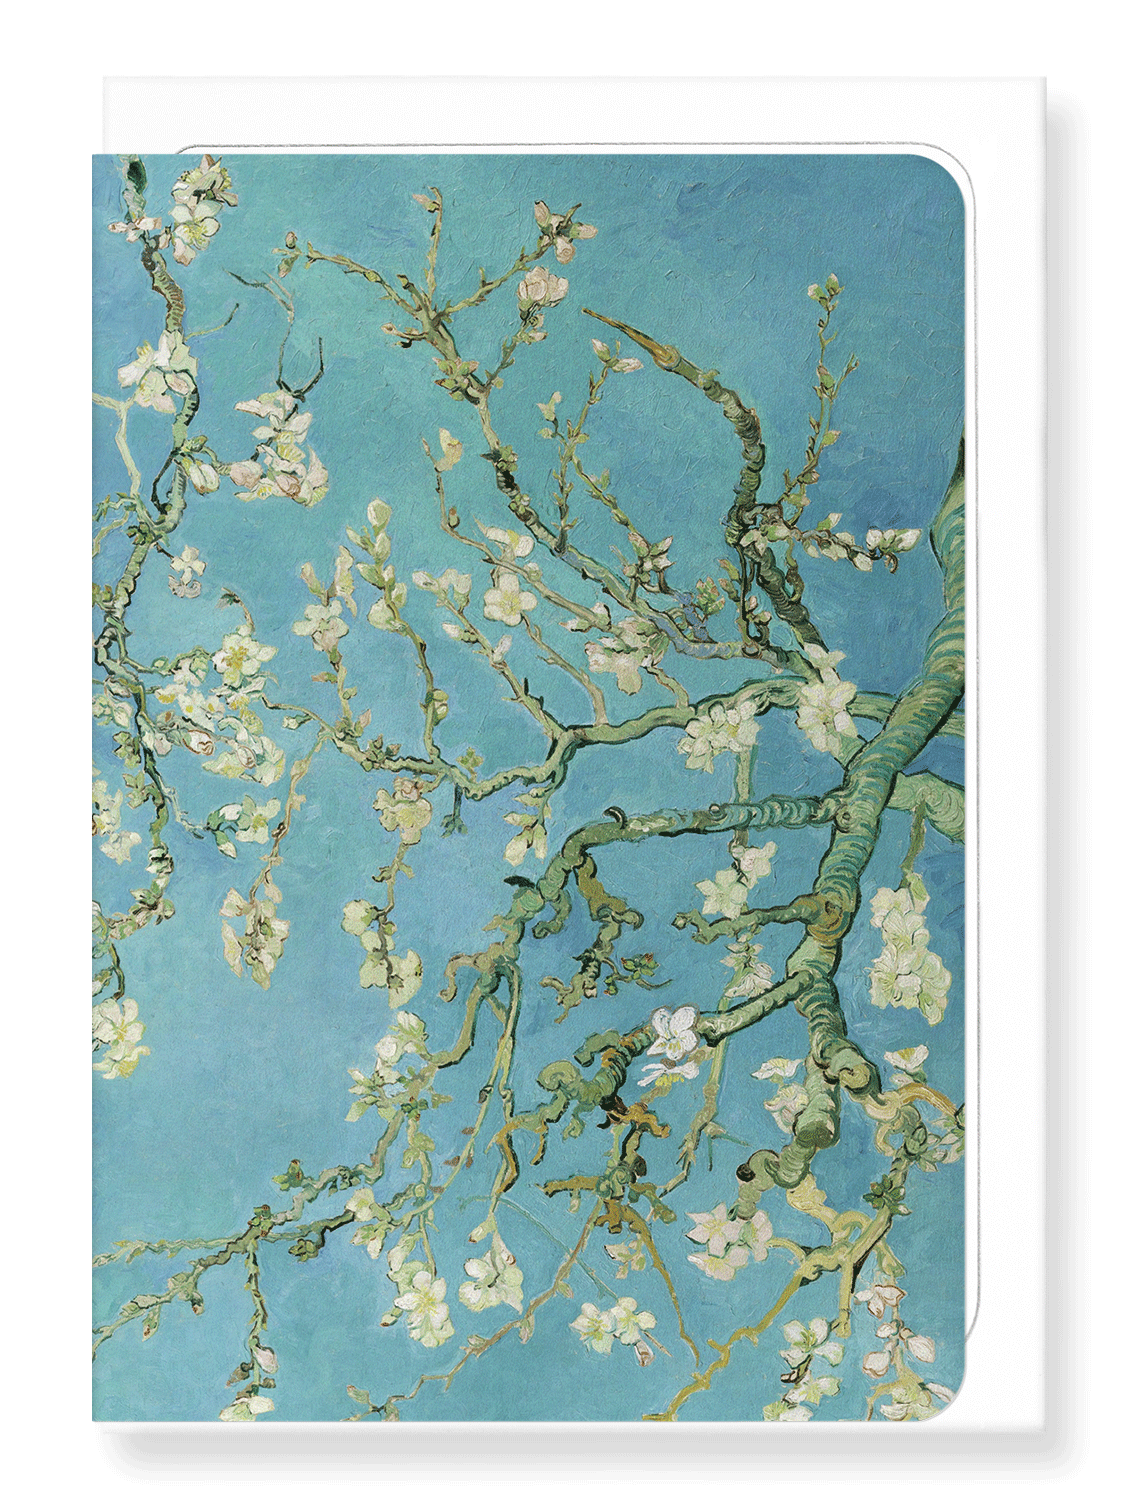 Ezen Designs - Blossoming almond tree by van gogh - Greeting Card - Front